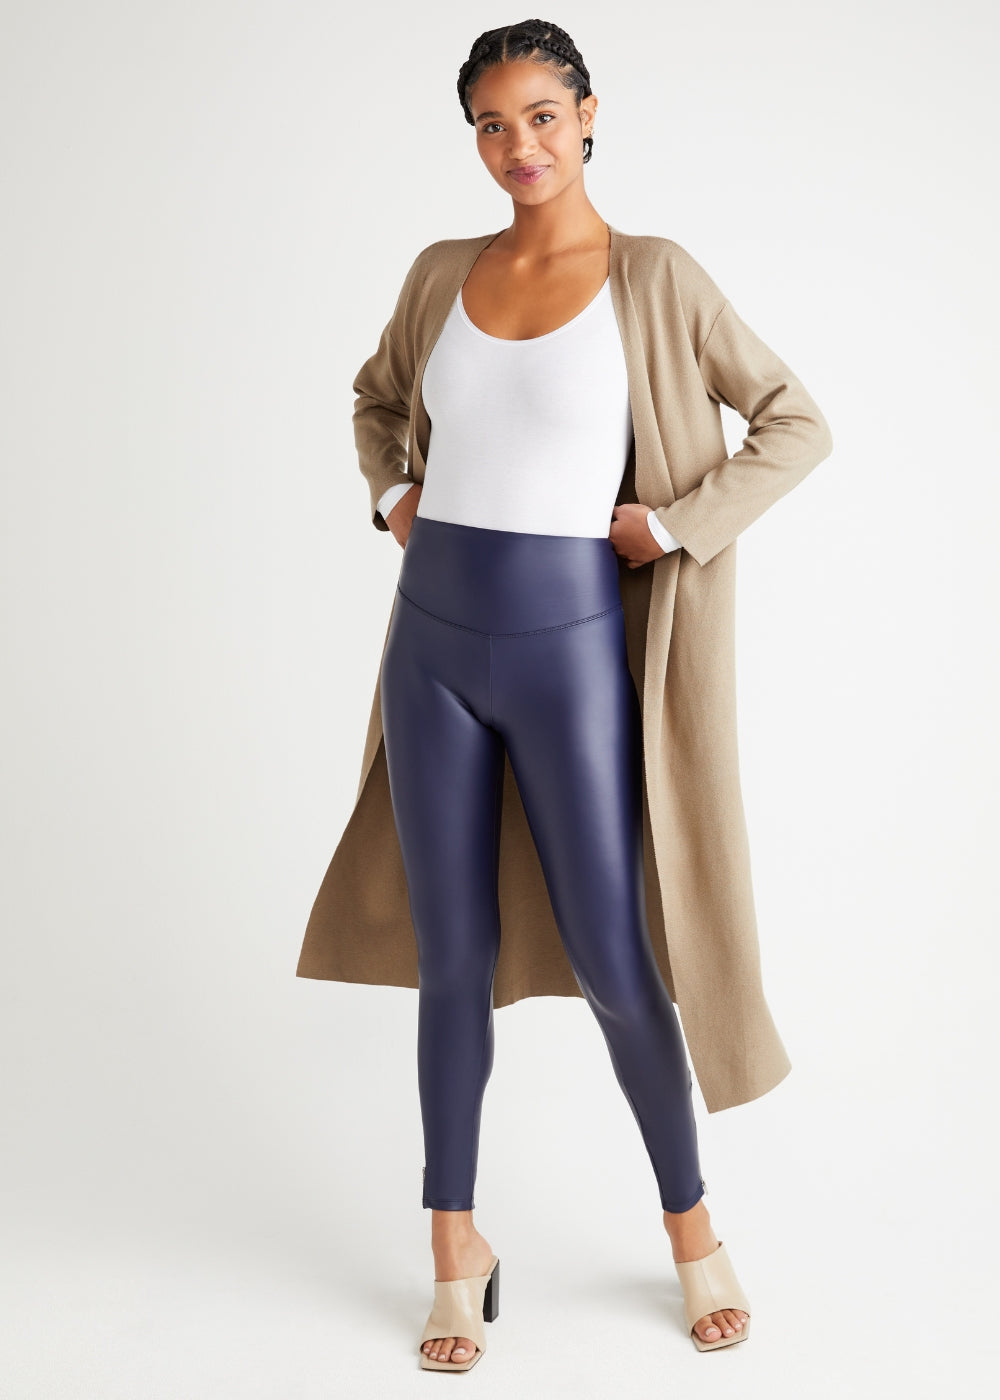 Faux Leather Shaping Legging with Side Zip from Yummie in Medieval Blue  - 1